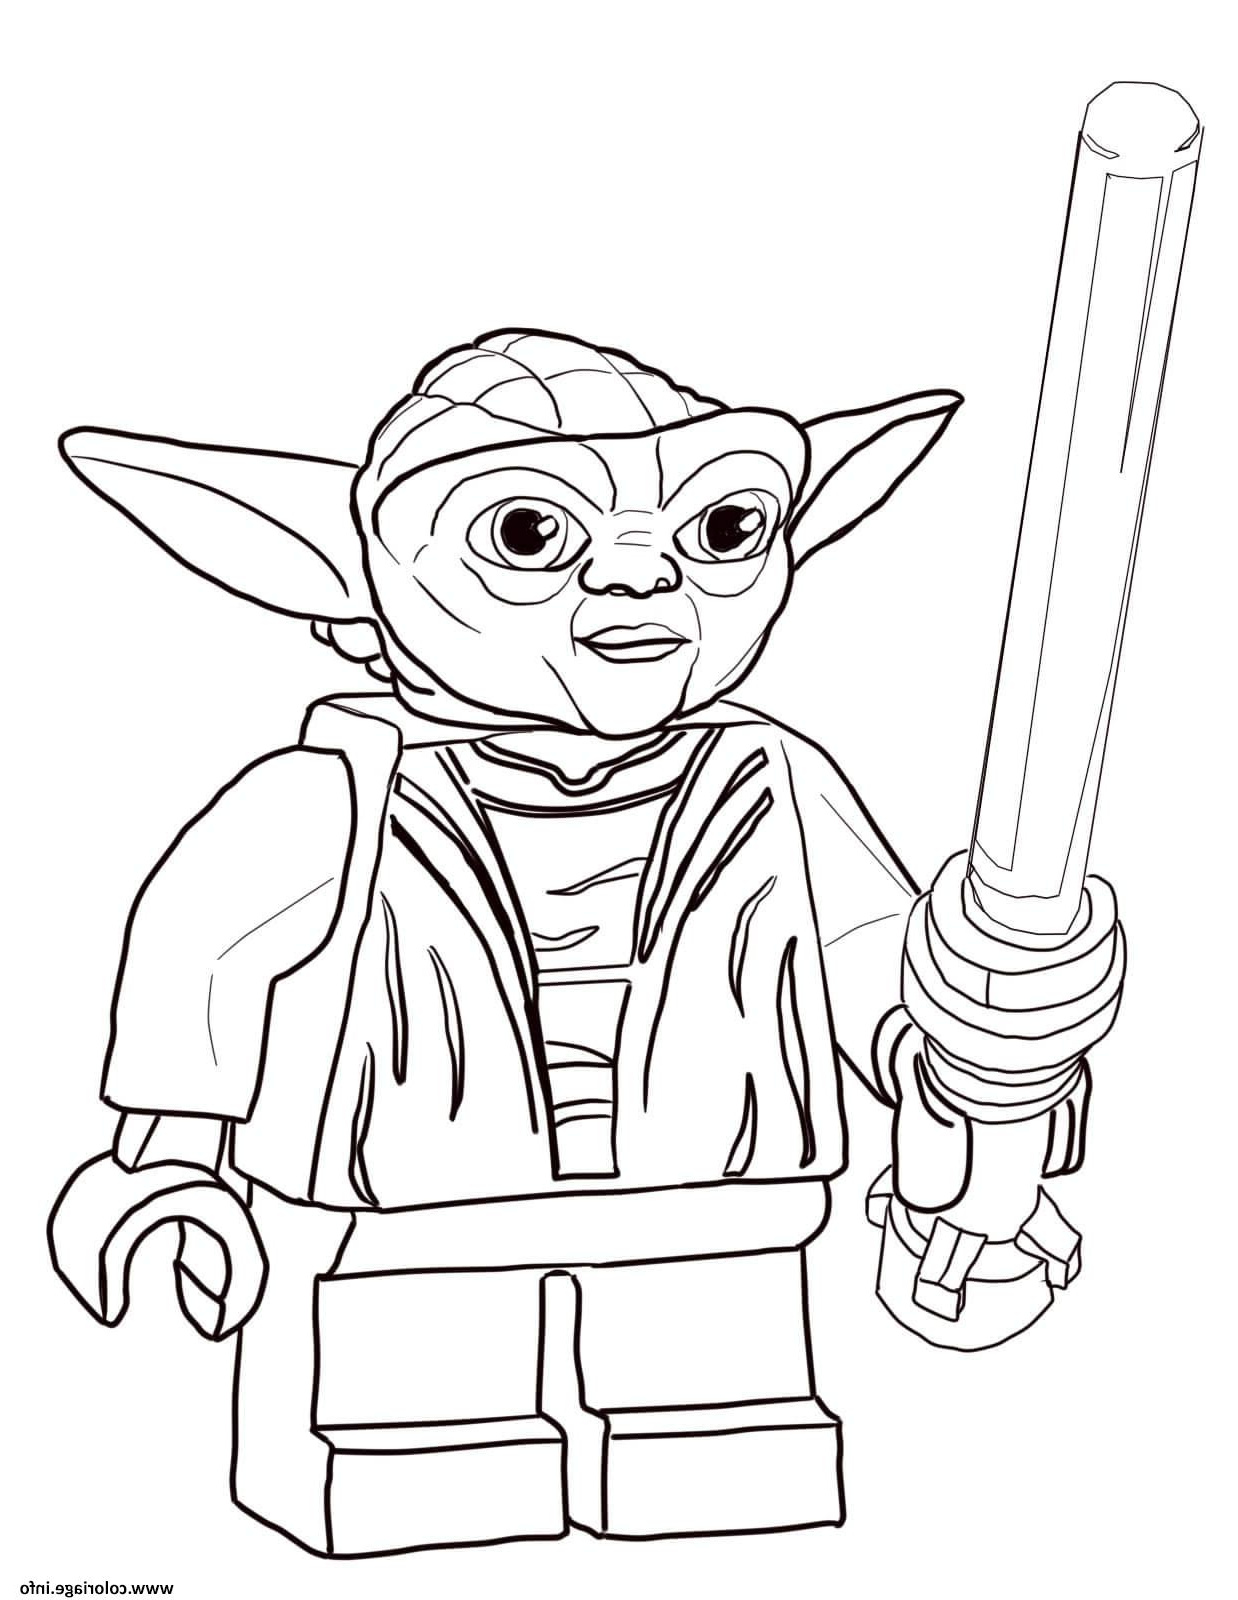 Stars Wars Coloriage Inspirant Image Coloriage Star Wars Lego Jecolorie